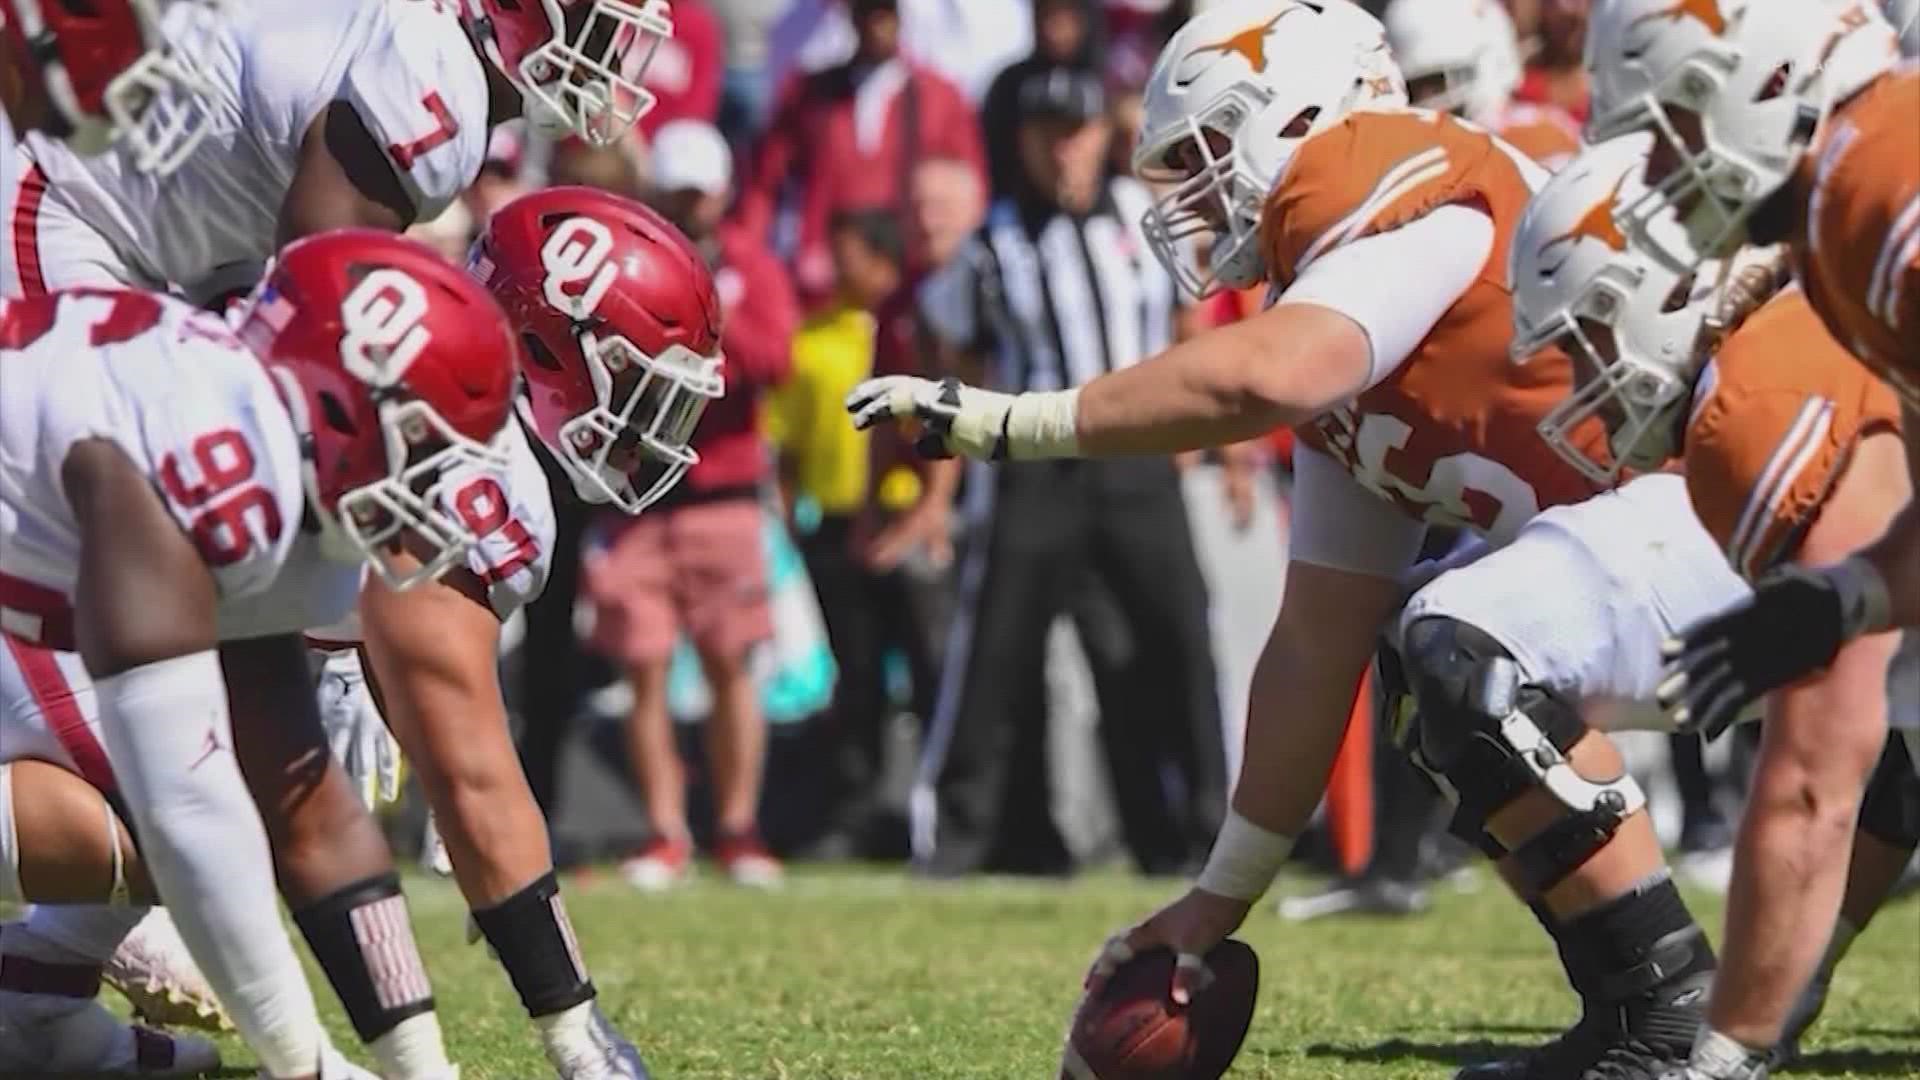 The SEC voted Thursday to extend membership invitations to the University of Texas and Oklahoma.